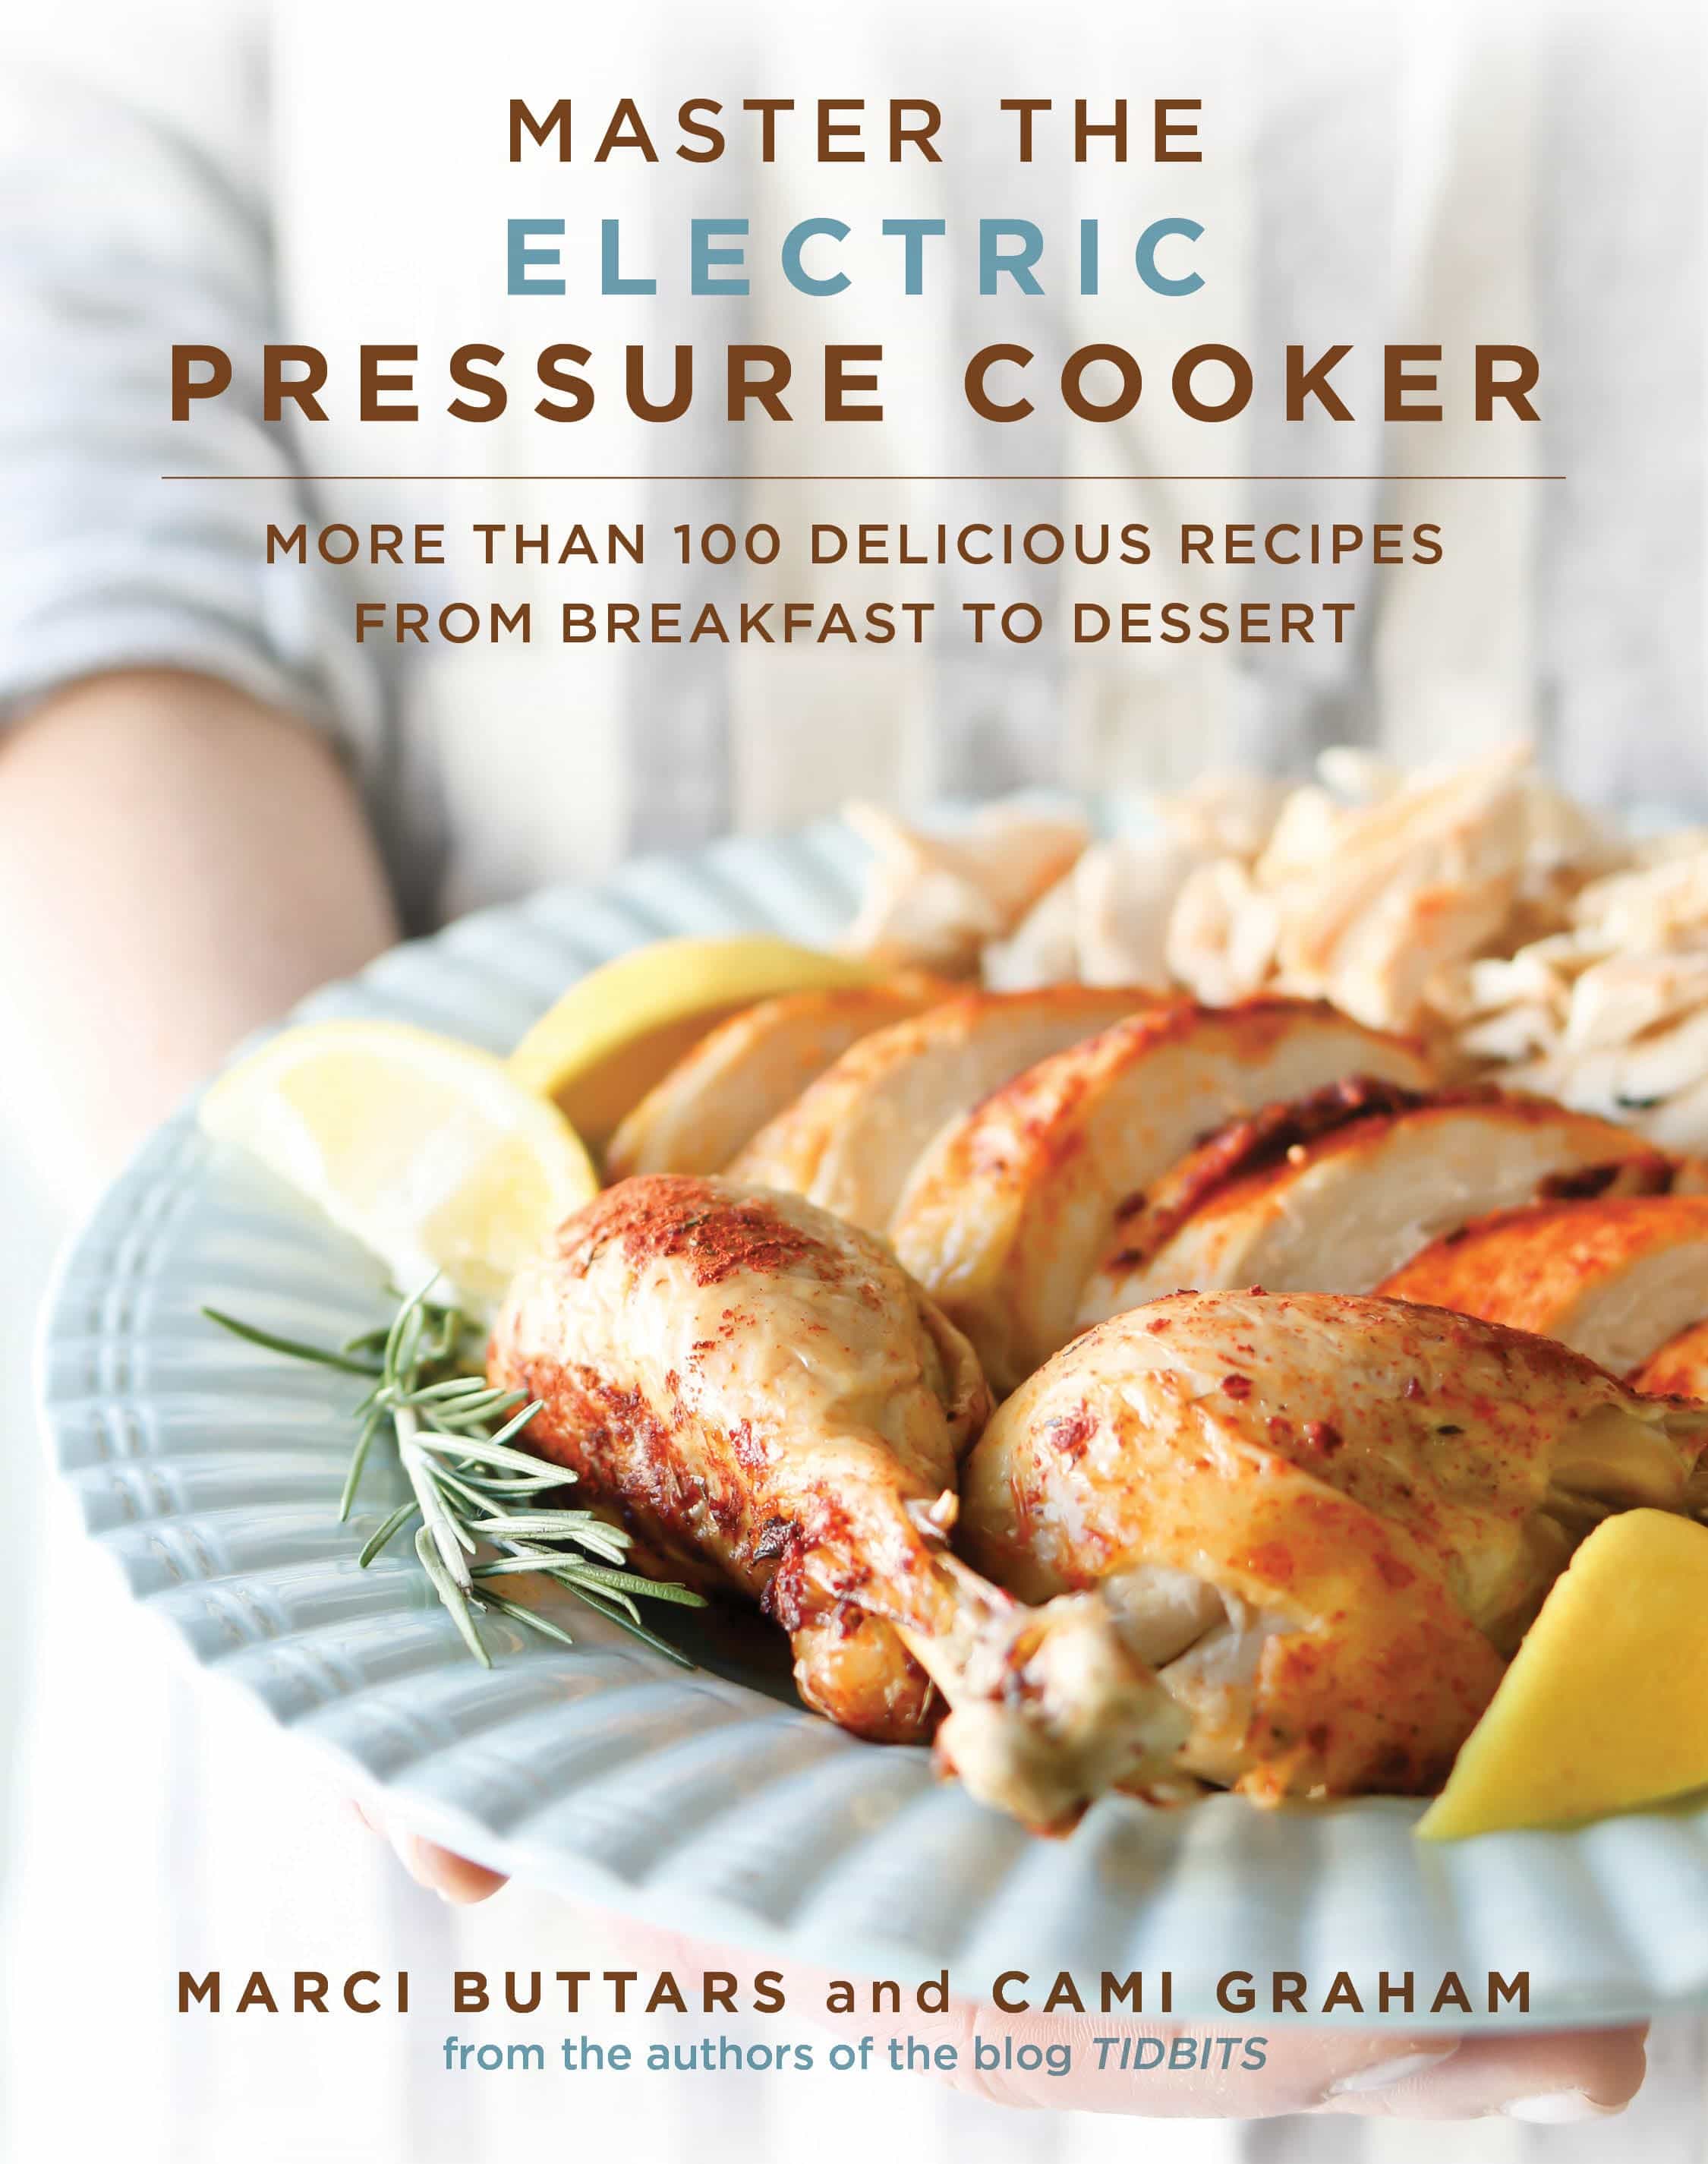 Published Master the Electric Pressure Cooker Cookbook, by Marci Buttars and Cami Graham